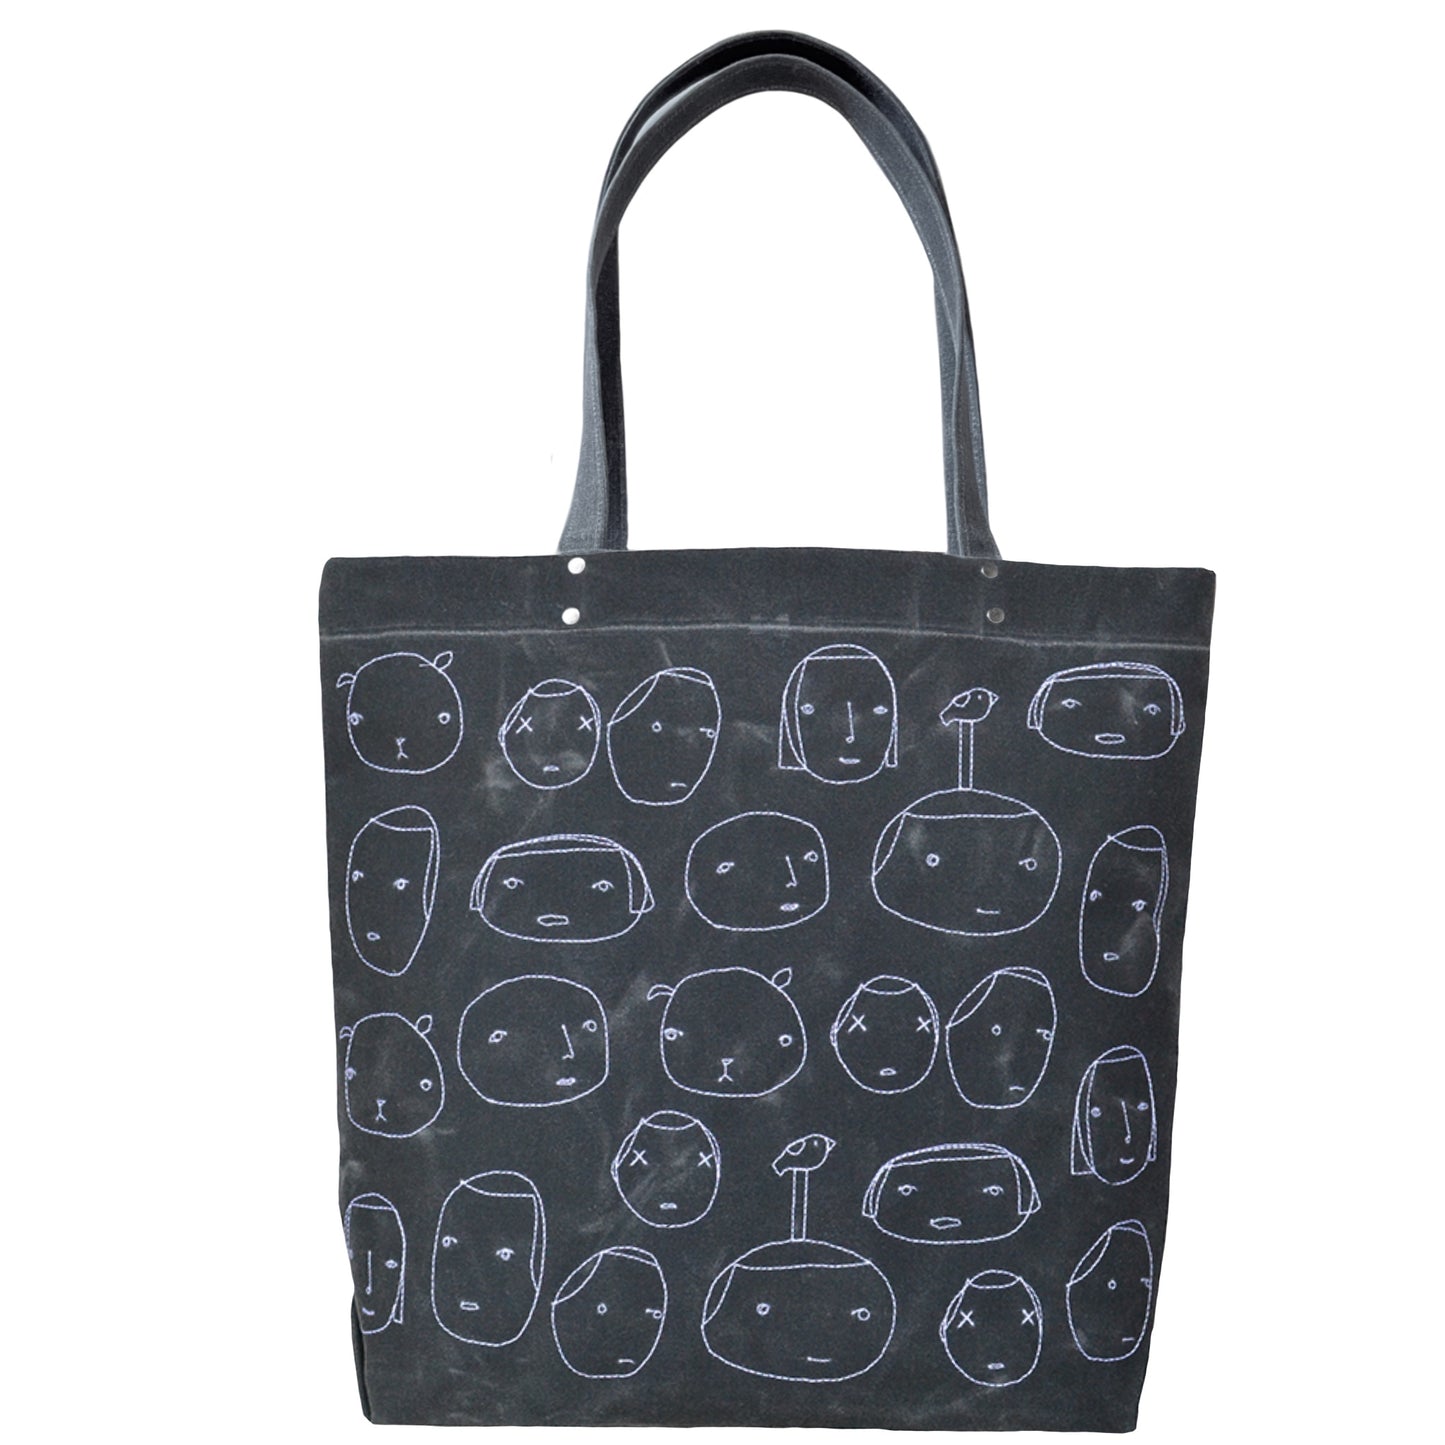 Everyday People Tote